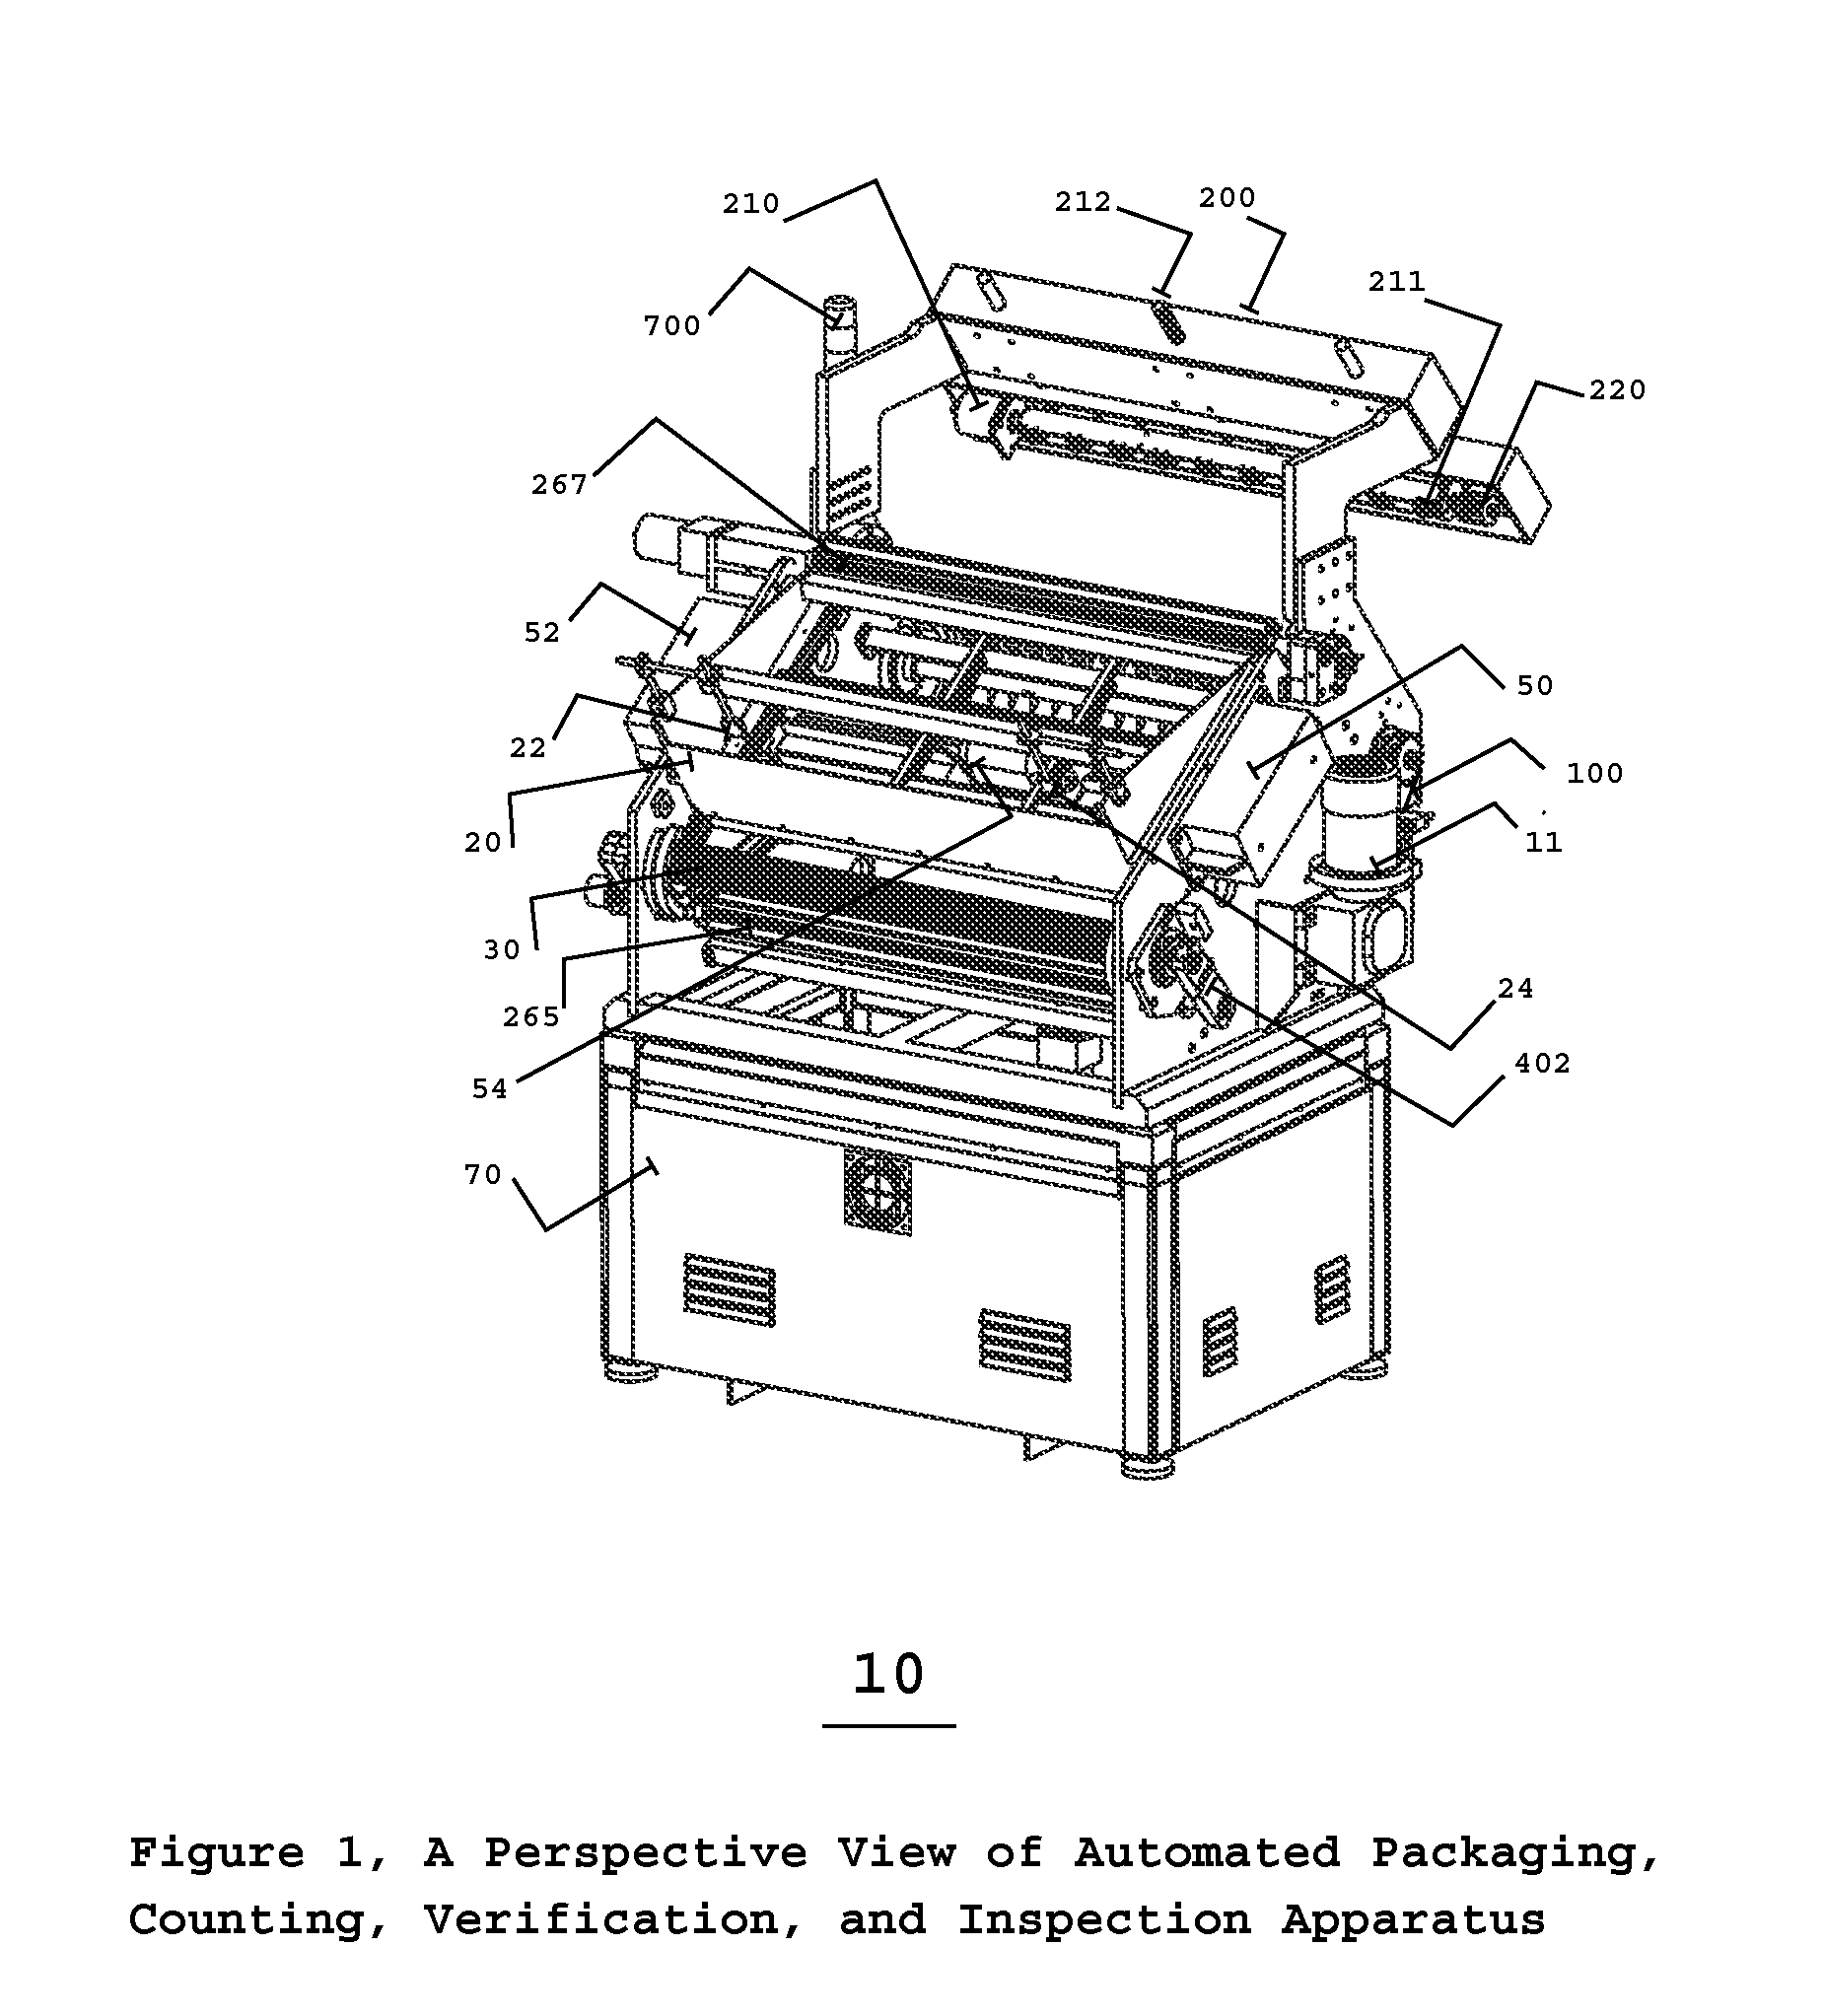 Automated pharmaceutical product packaging, inspection, verification, and counting apparatus